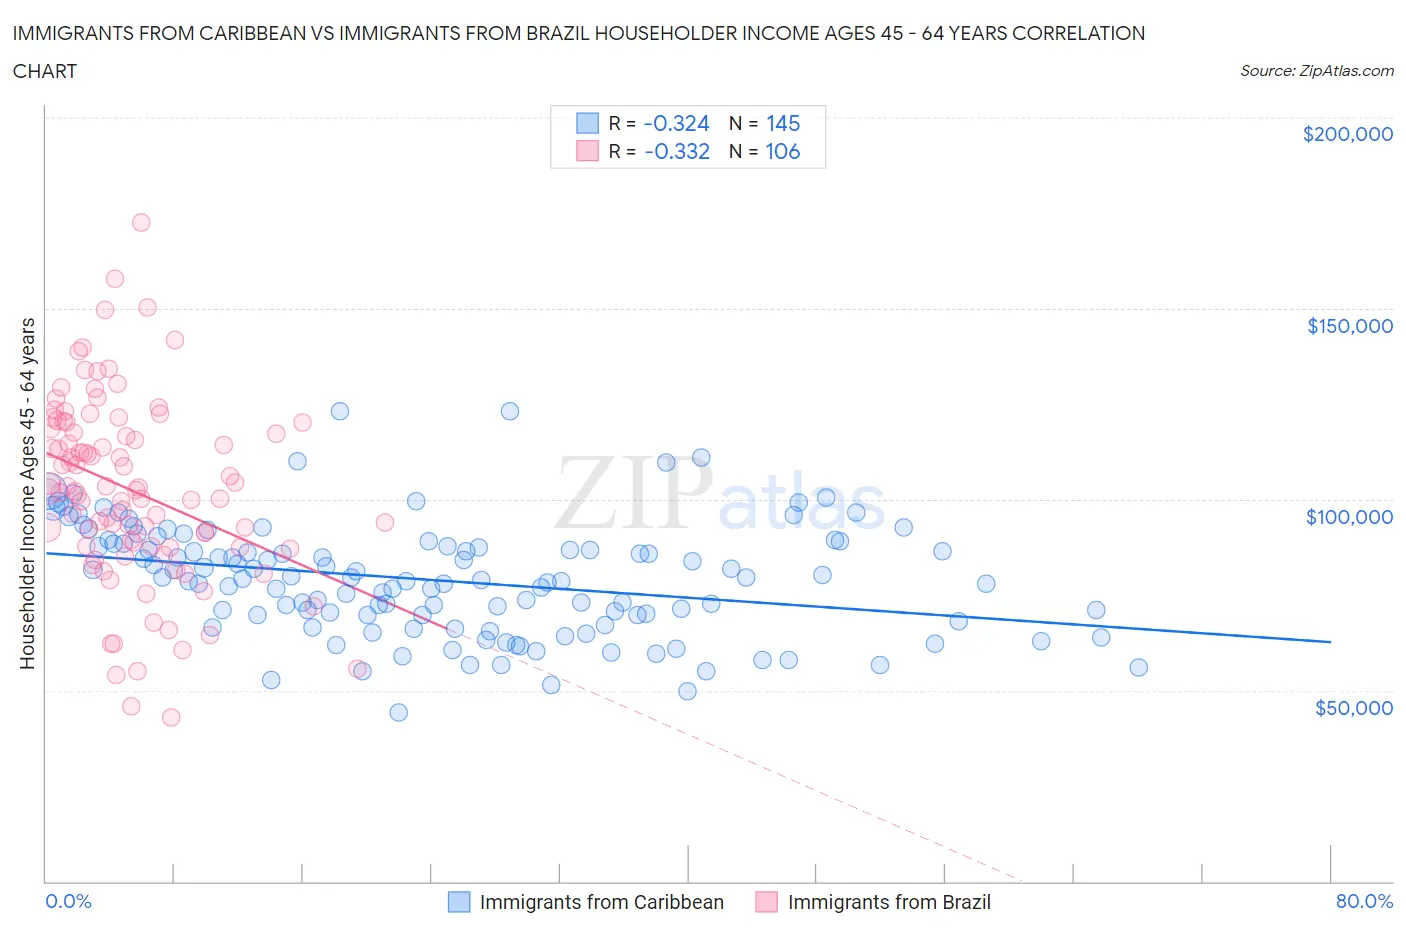 Immigrants from Caribbean vs Immigrants from Brazil Householder Income Ages 45 - 64 years